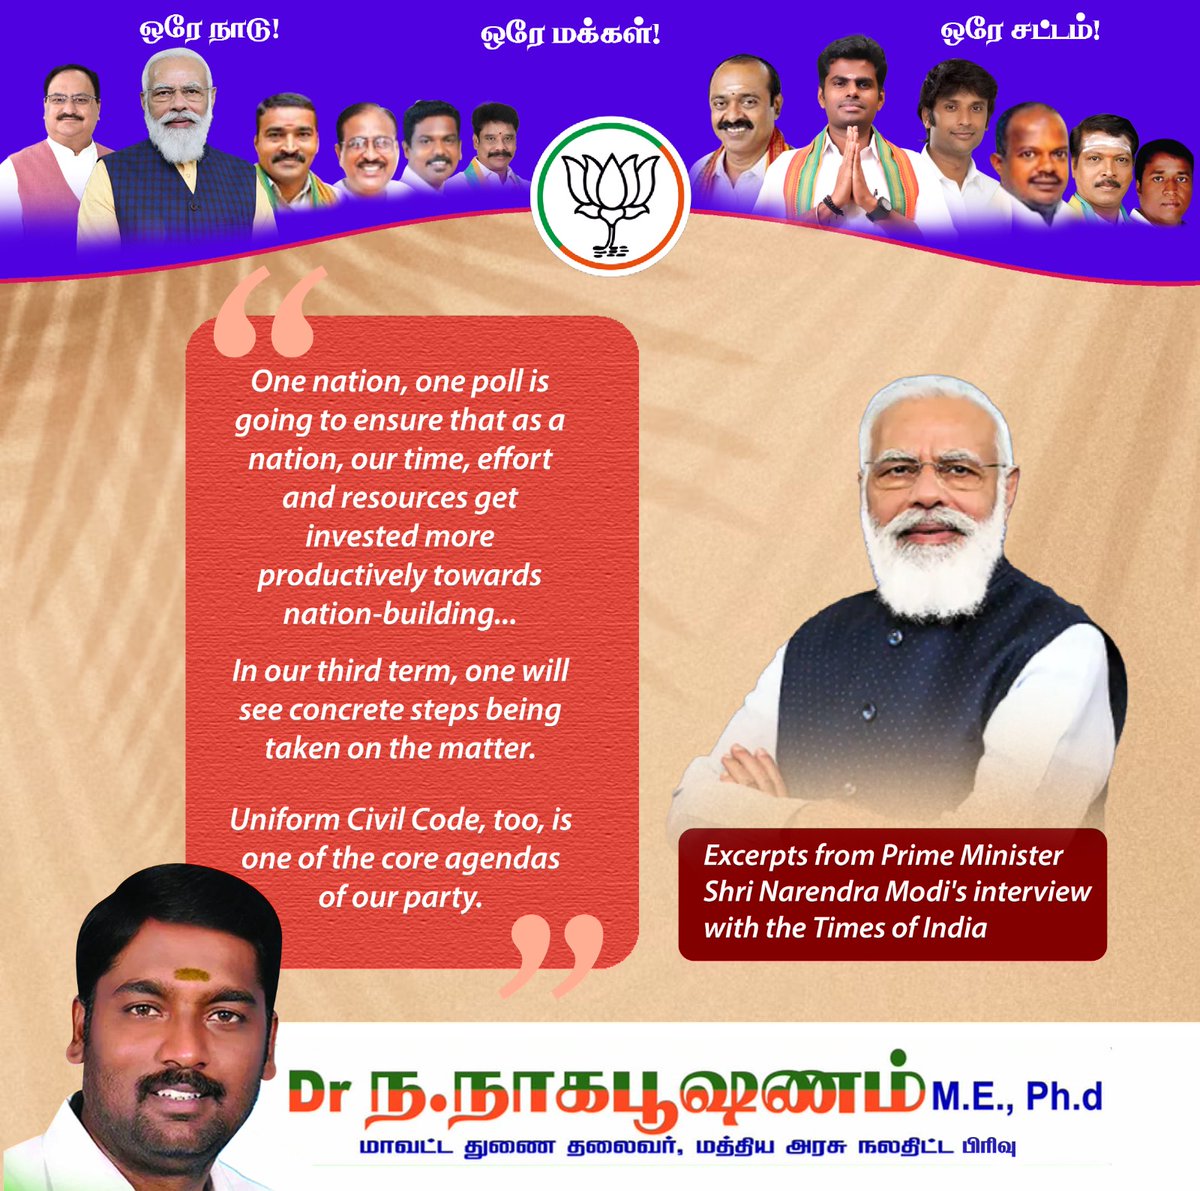 PM Shri Narendra Modi's interview with @timesofindia highlights the significance of #OneNationOnePoll. Streamlining elections means more focus on nation-building! Let's invest our time, effort, and resources wisely for a stronger, more efficient India. 🇮🇳 #IndiaElections